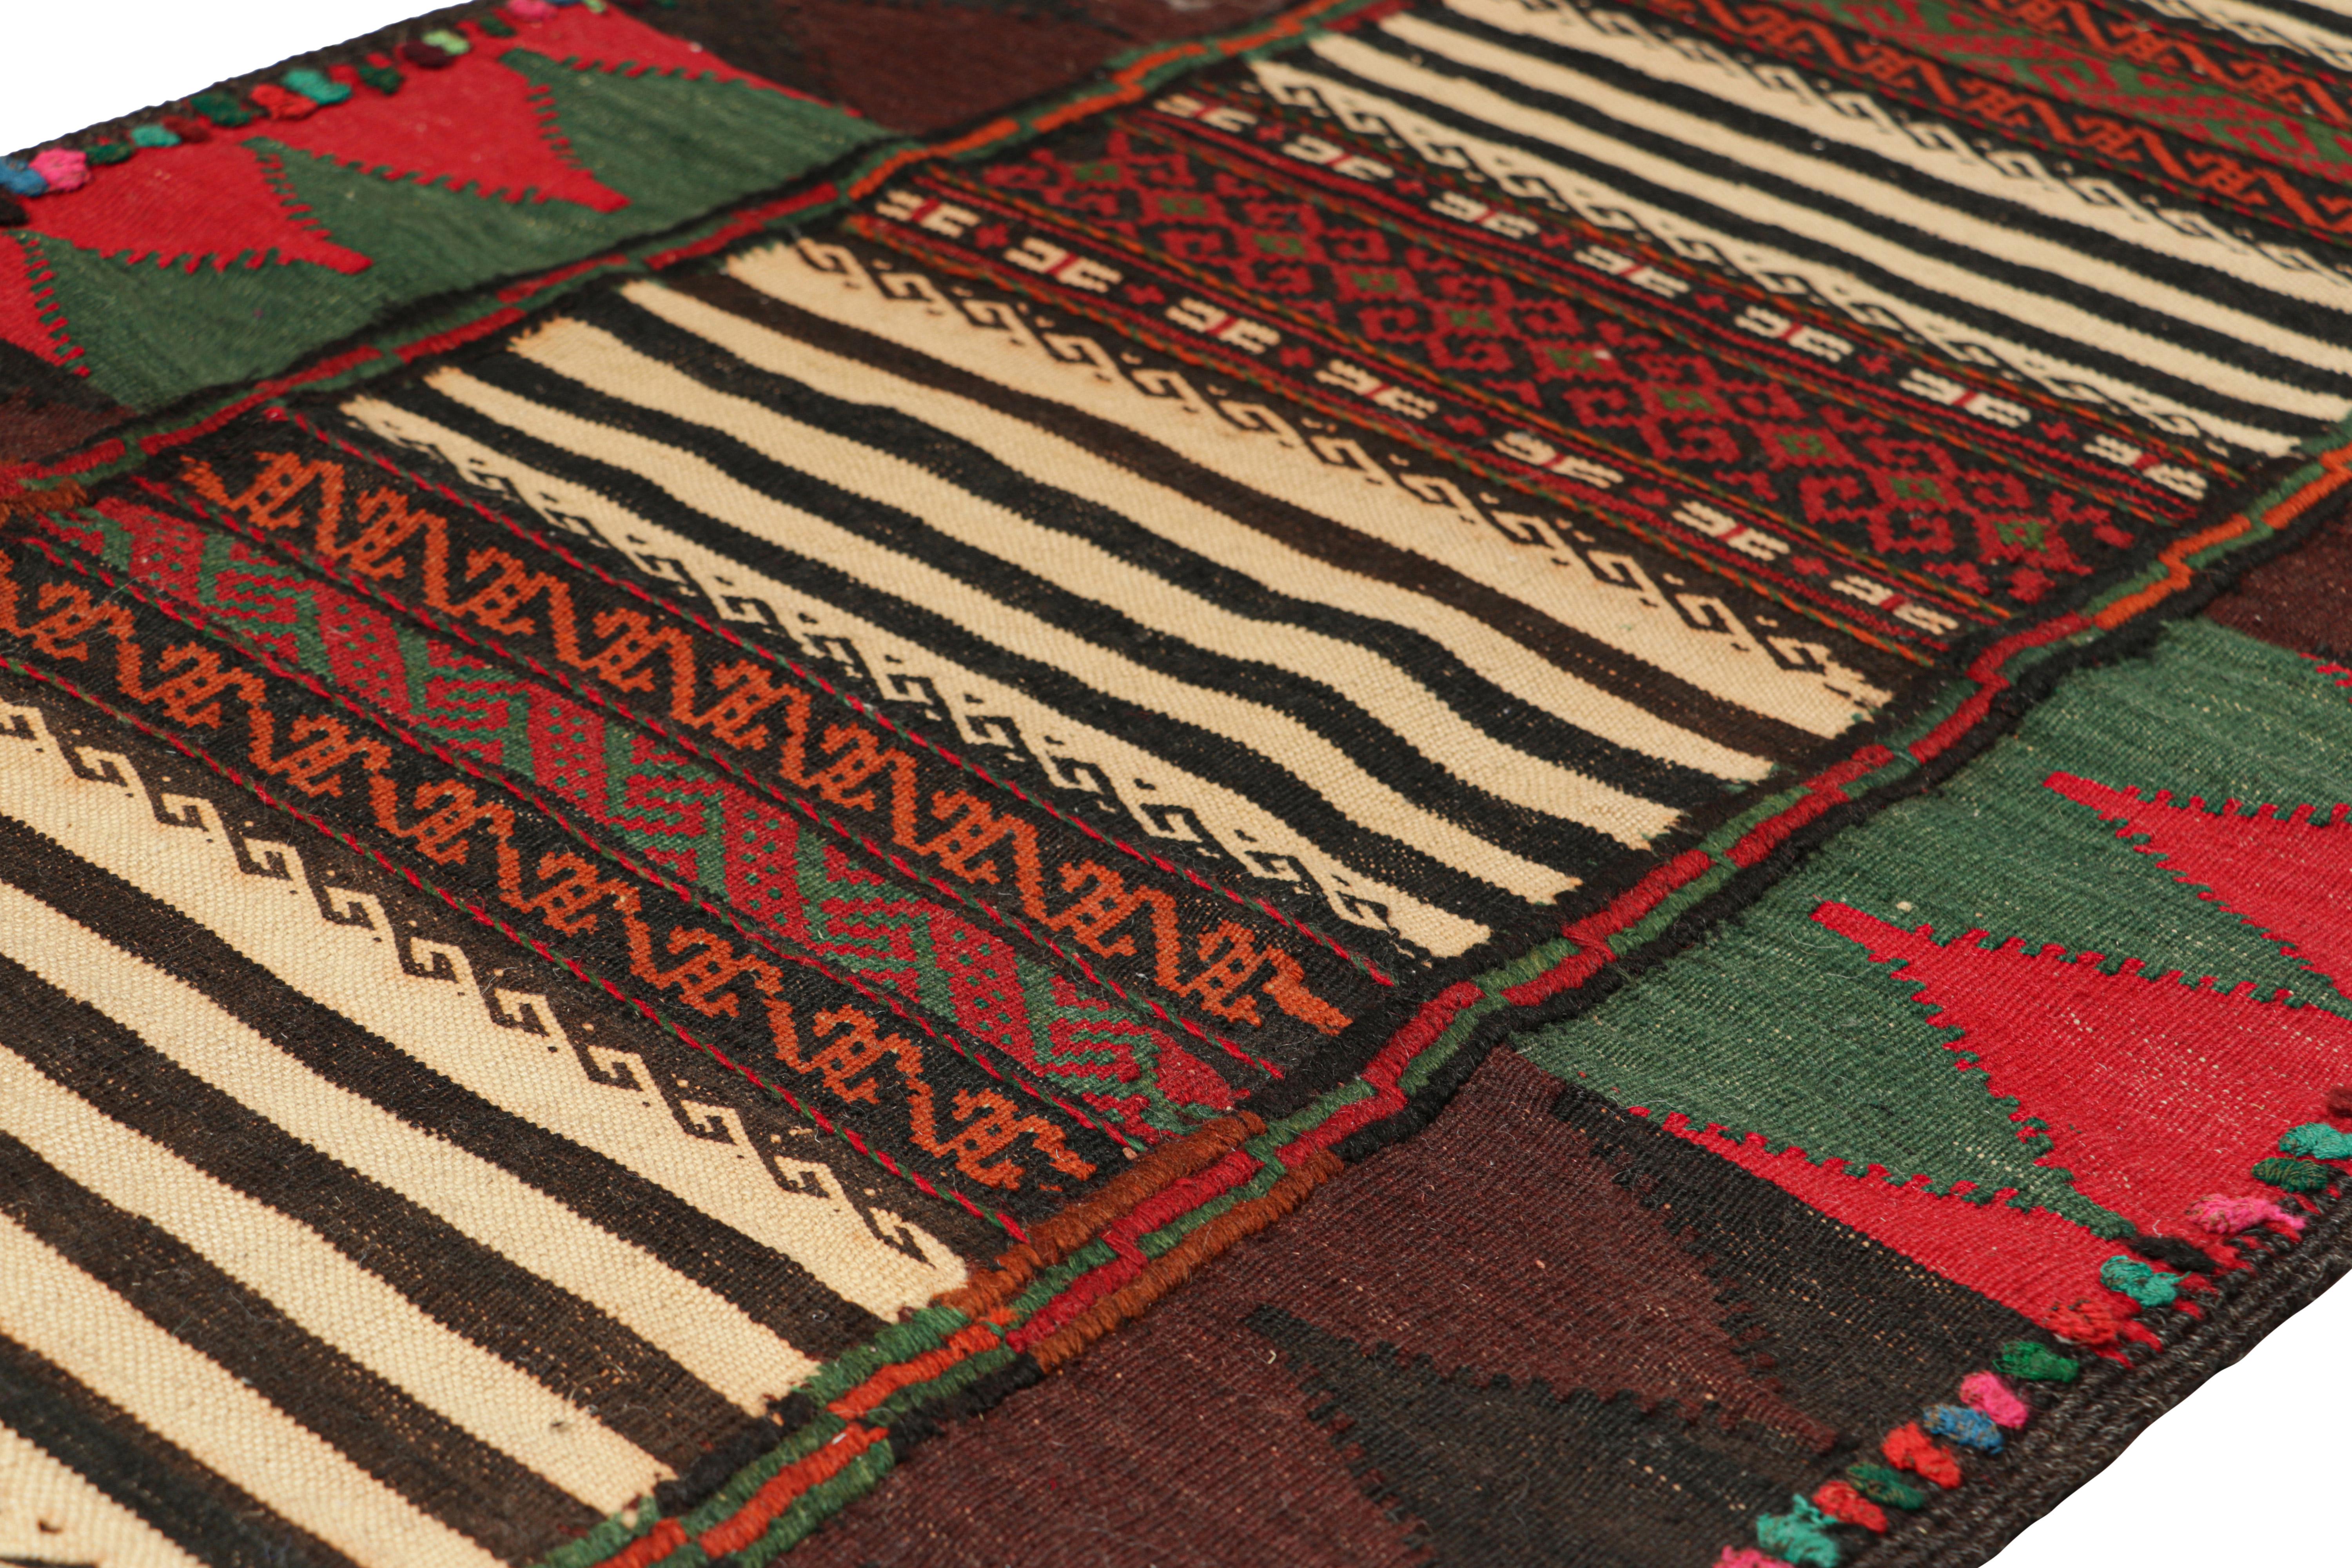 Hand-Woven Vintage Afghan Kilim with Polychromatic Geometric Patterns from Rug & Kilim For Sale